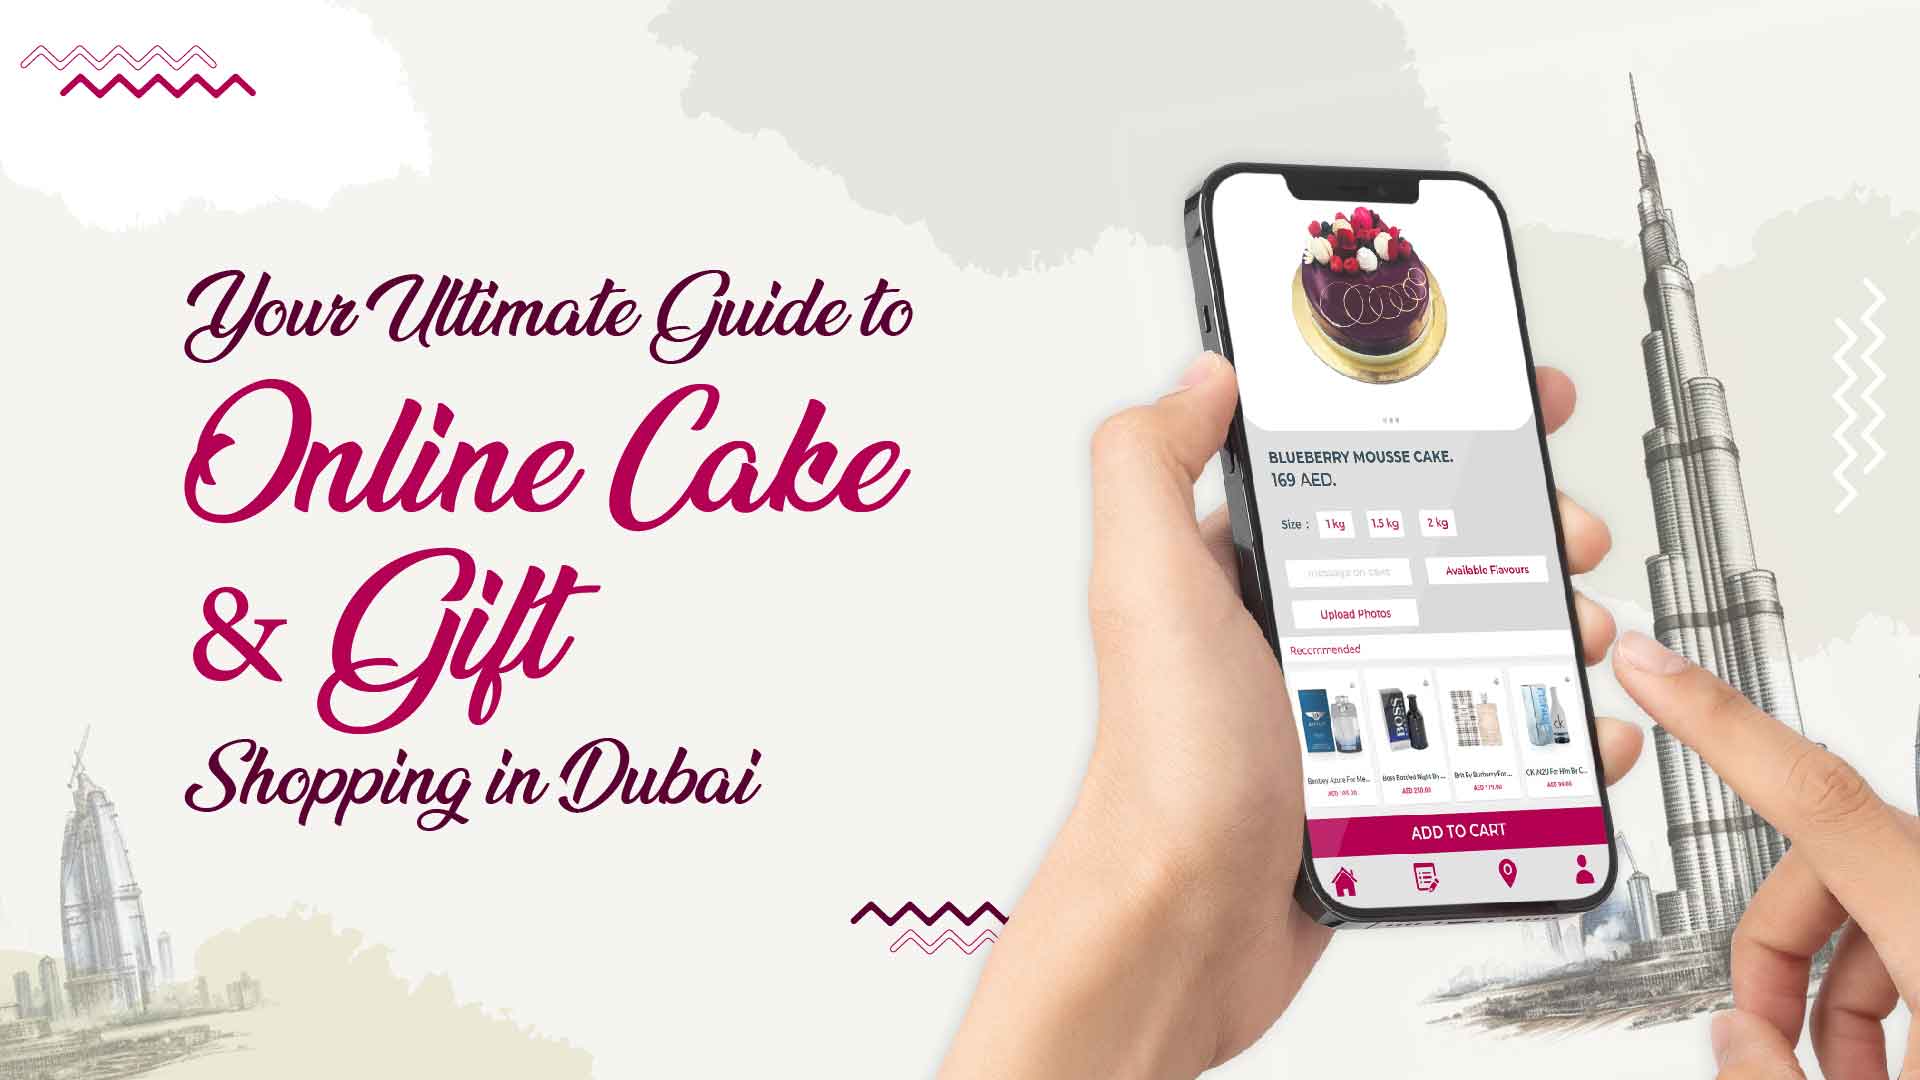 Online Cake and Gift Shop in Dubai